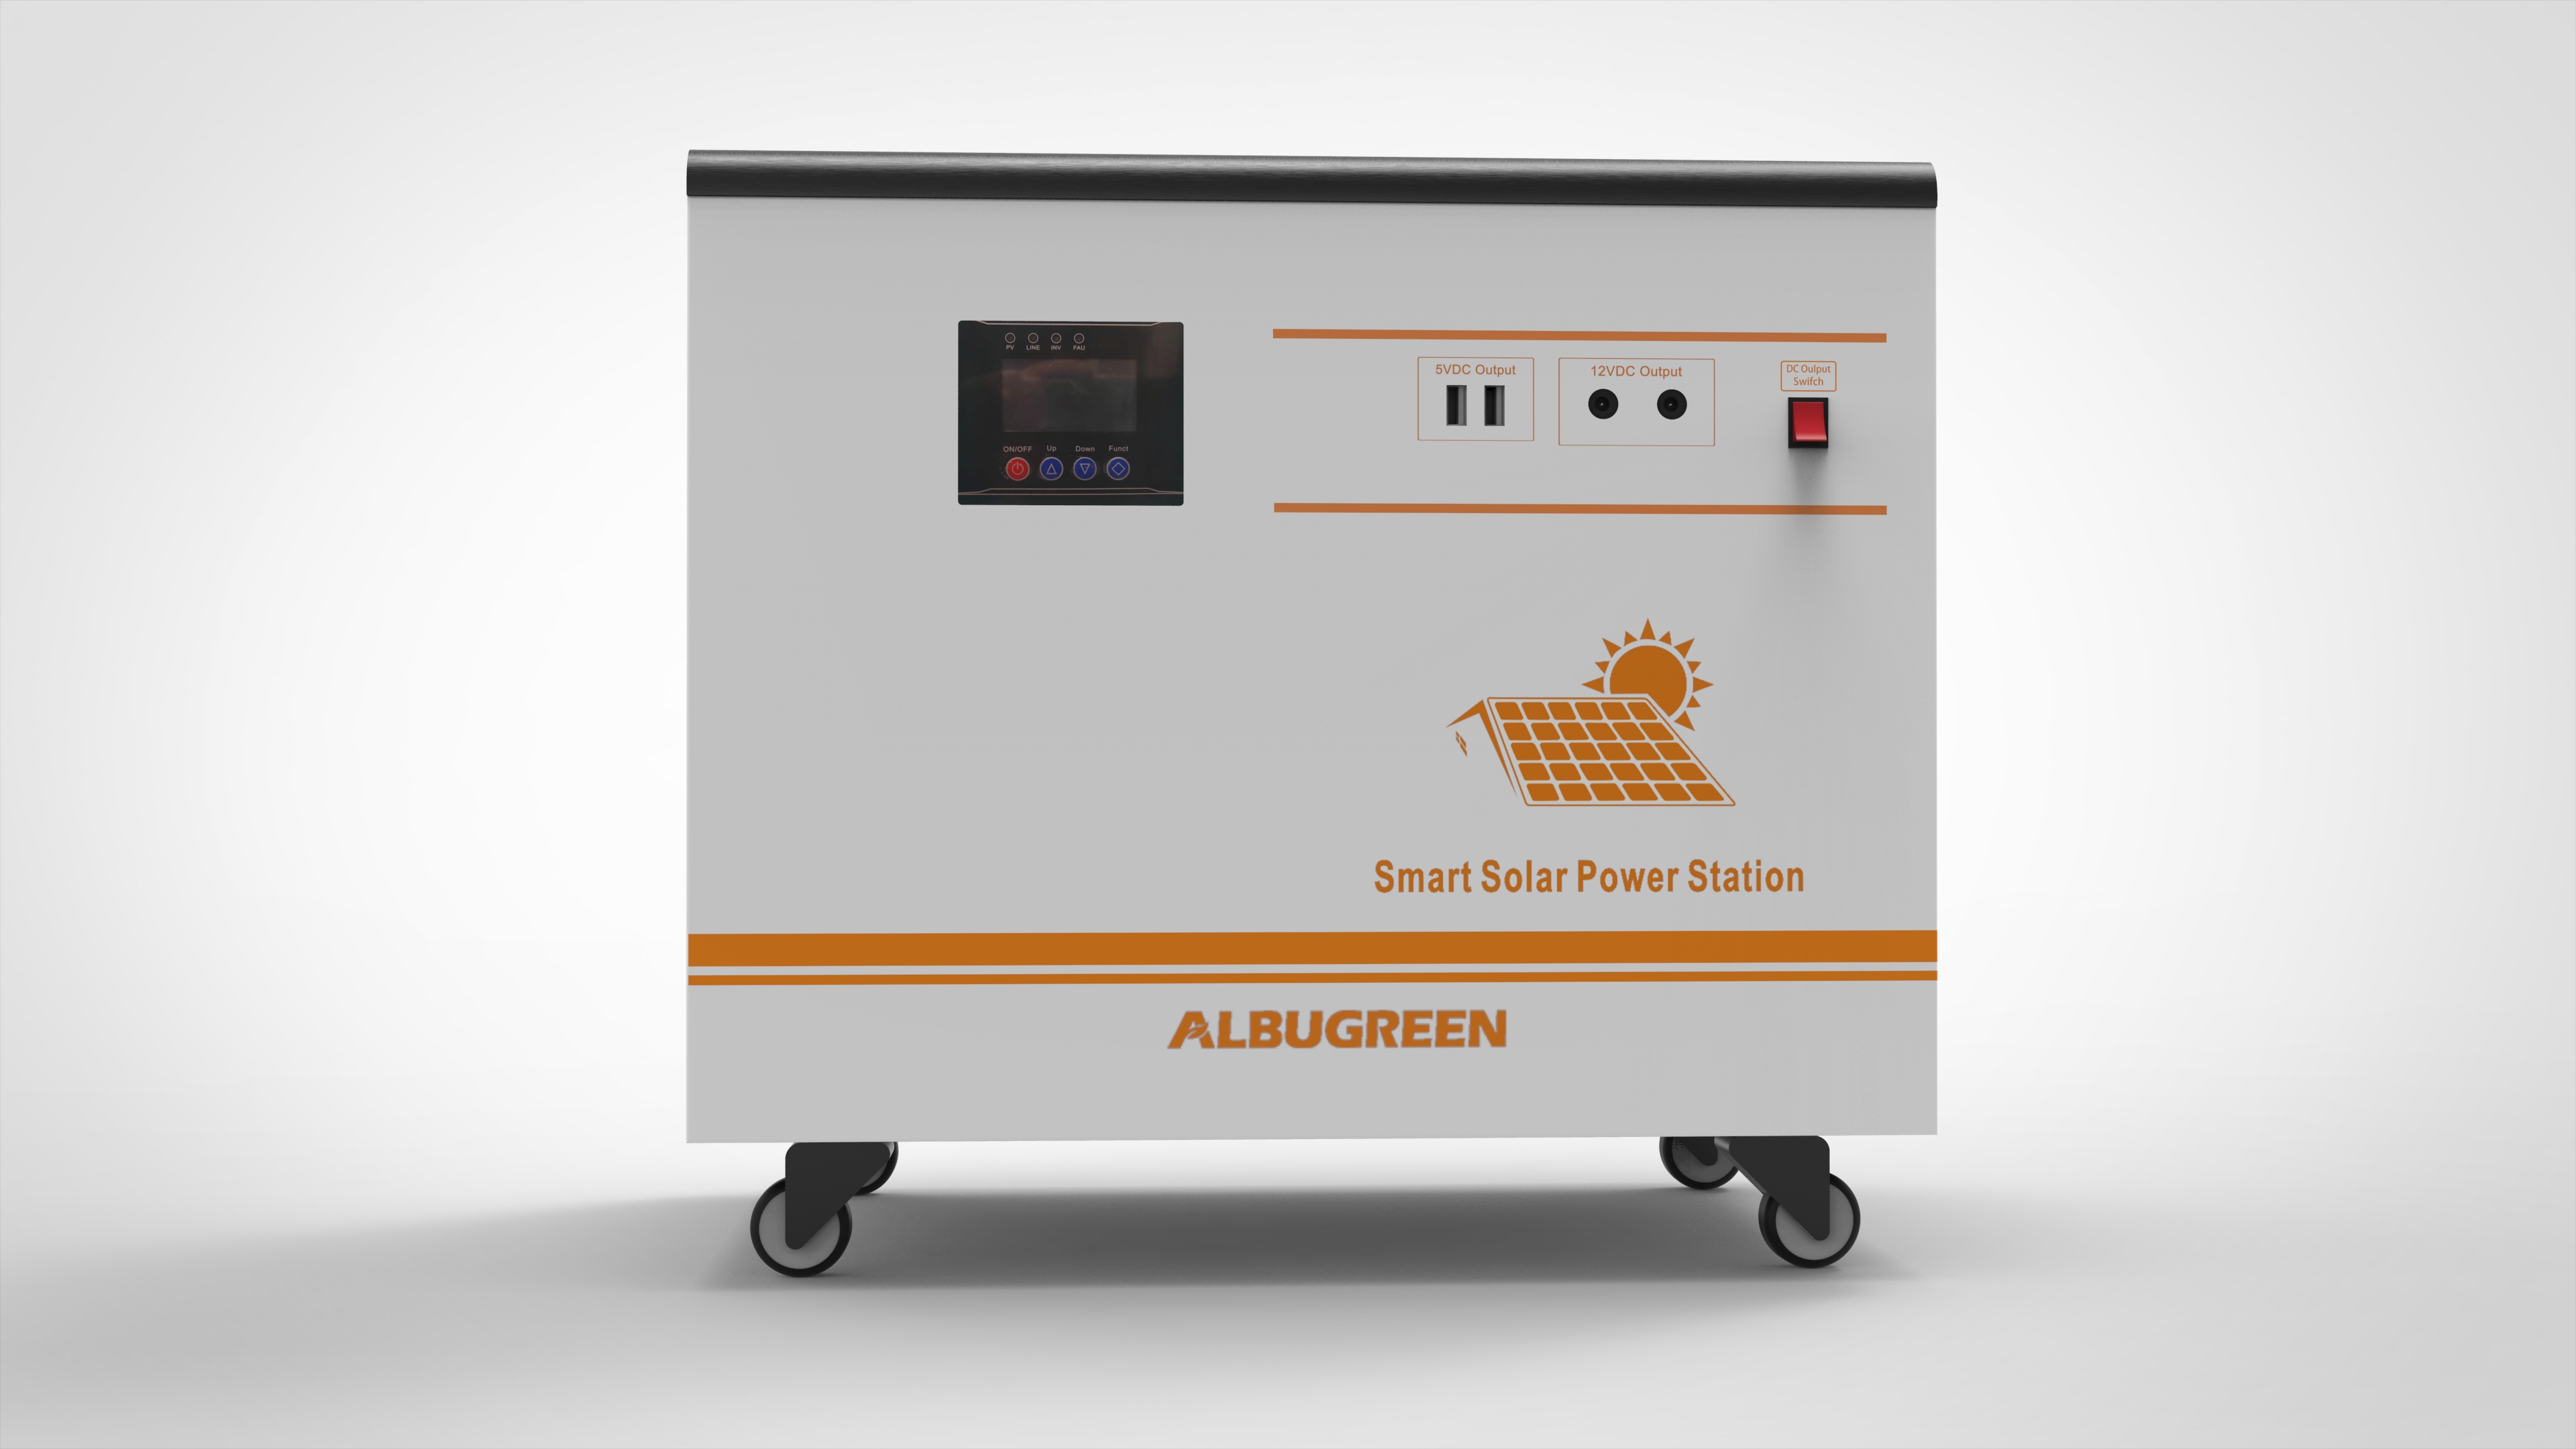 3000w 220v High Capacity in One Solar Power System for Cars